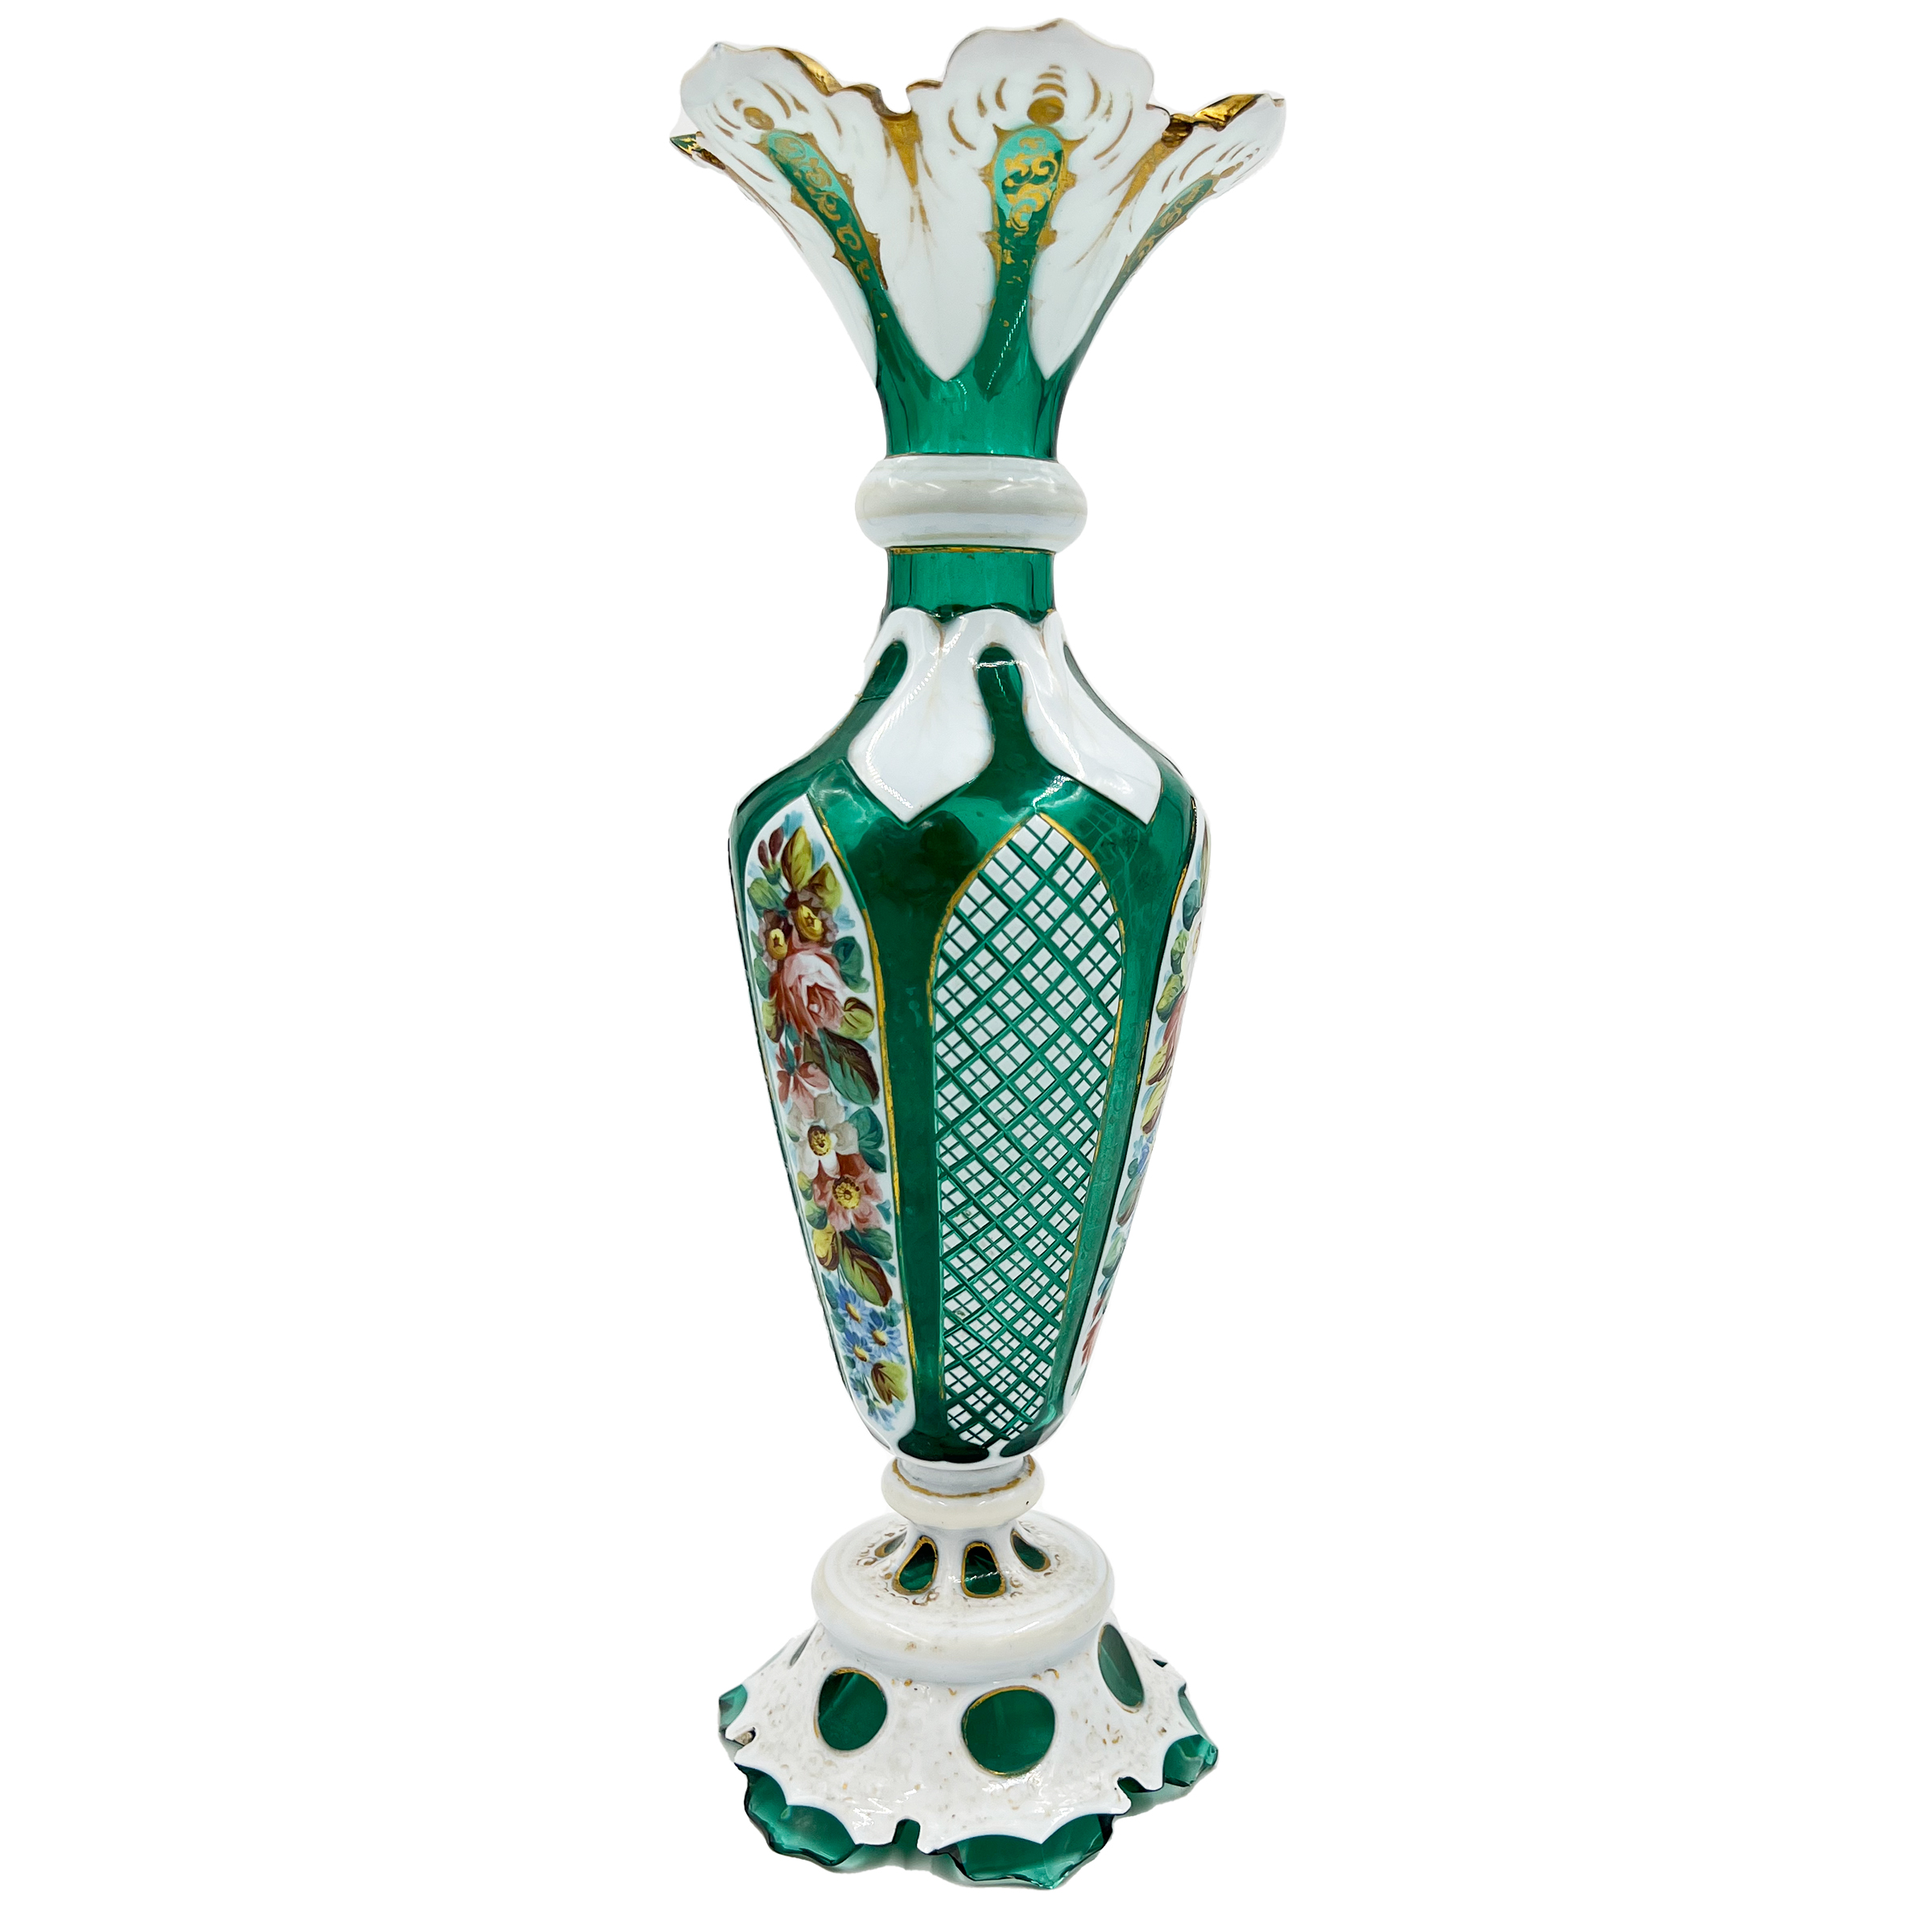 GREEN AND WHITE BOHEMIAN FLASHED GLASS VASE, 19TH CENTURY - Image 2 of 7